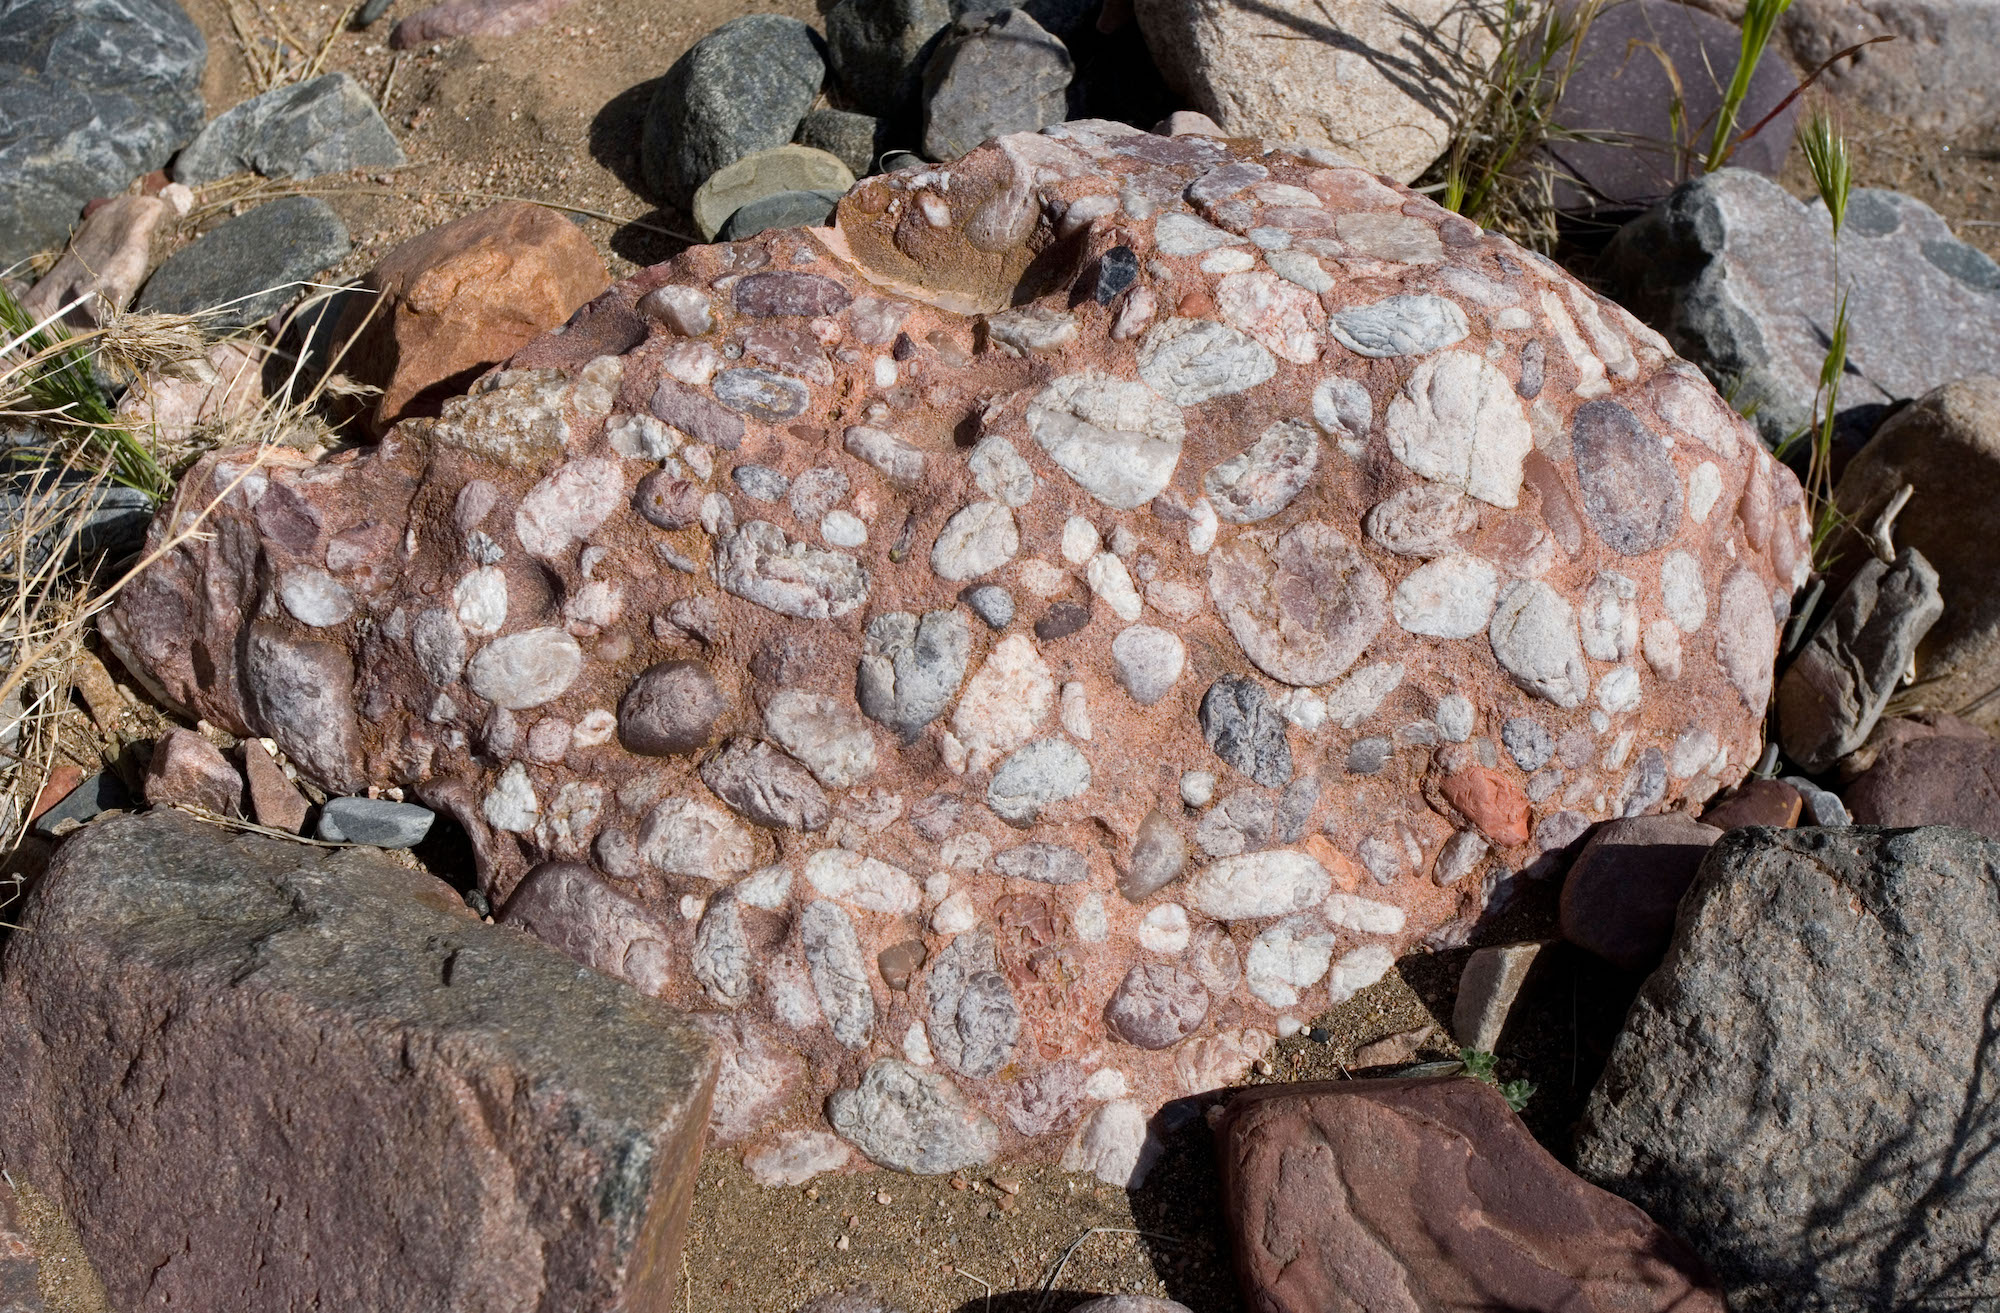 Conglomerate: Definition, Meaning, Creation, and Examples